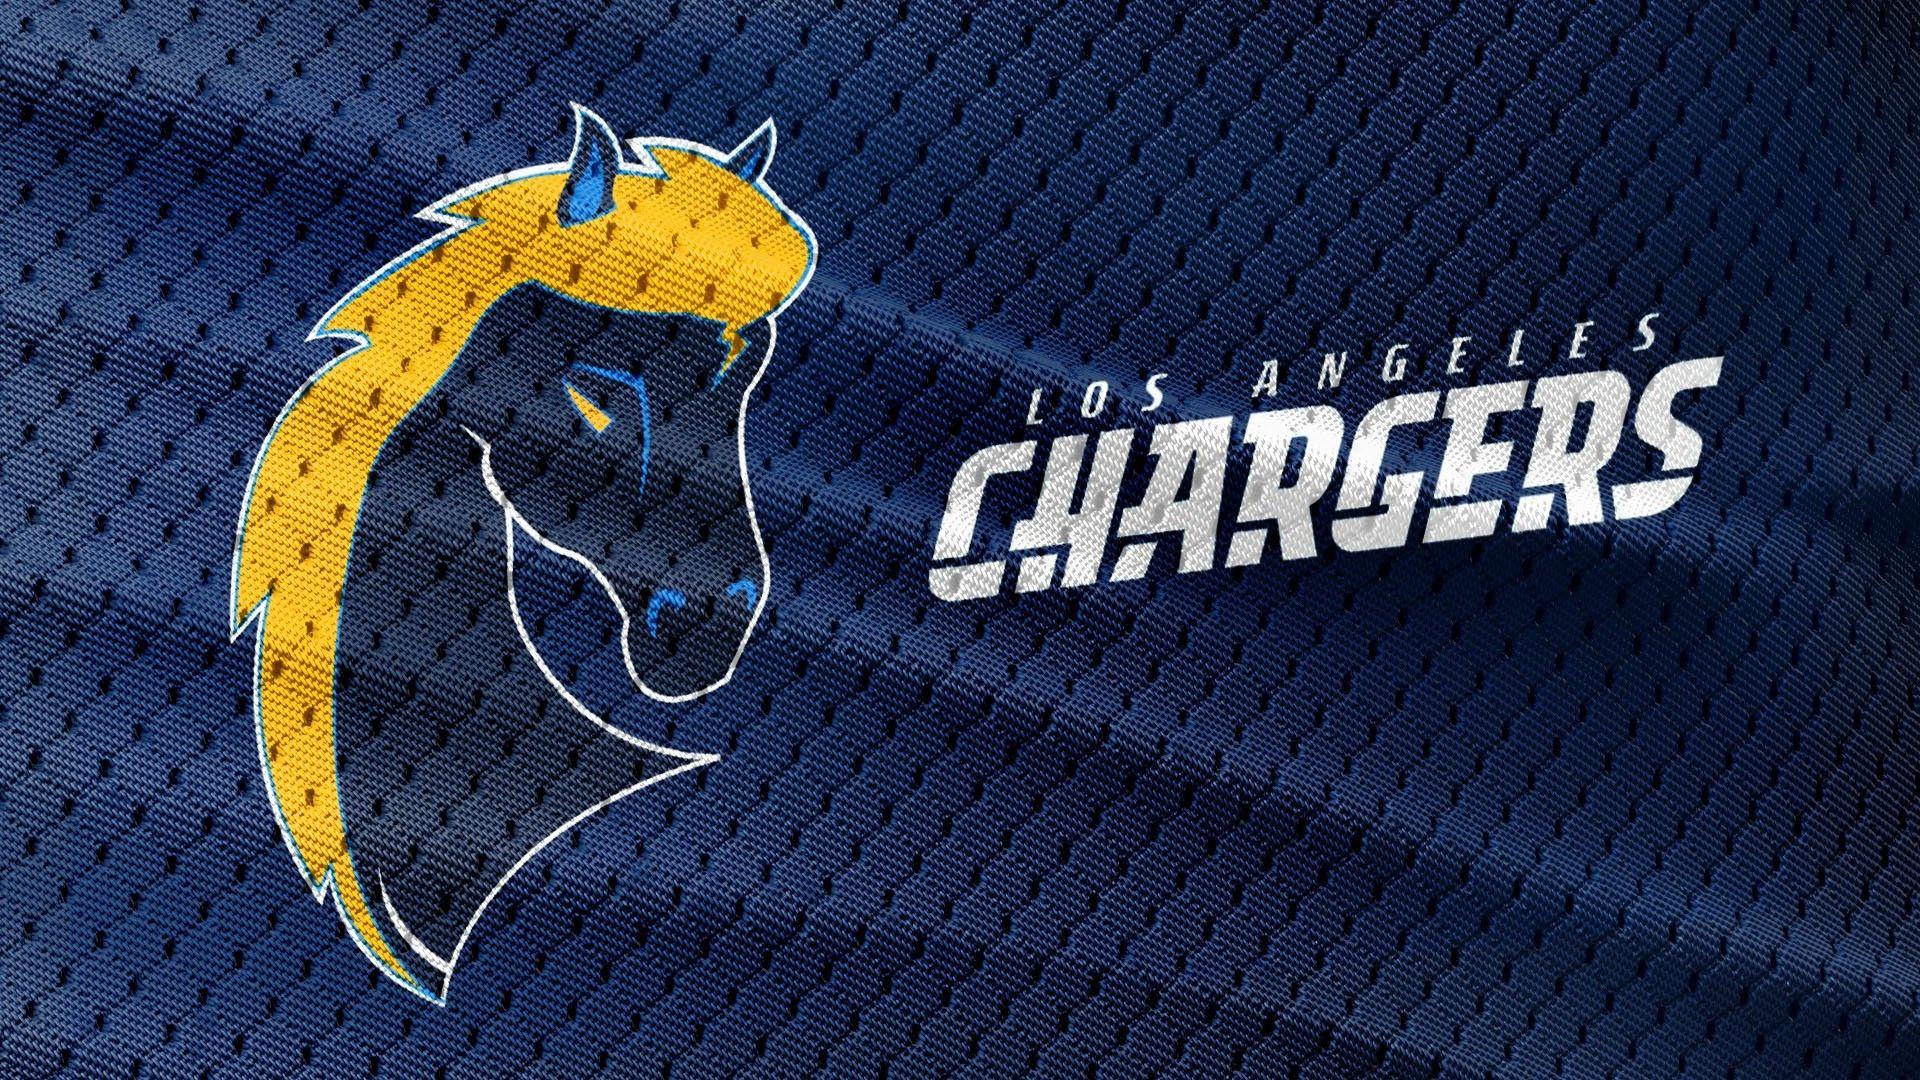 Los Angeles Chargers Mac Background NFL Football Wallpaper